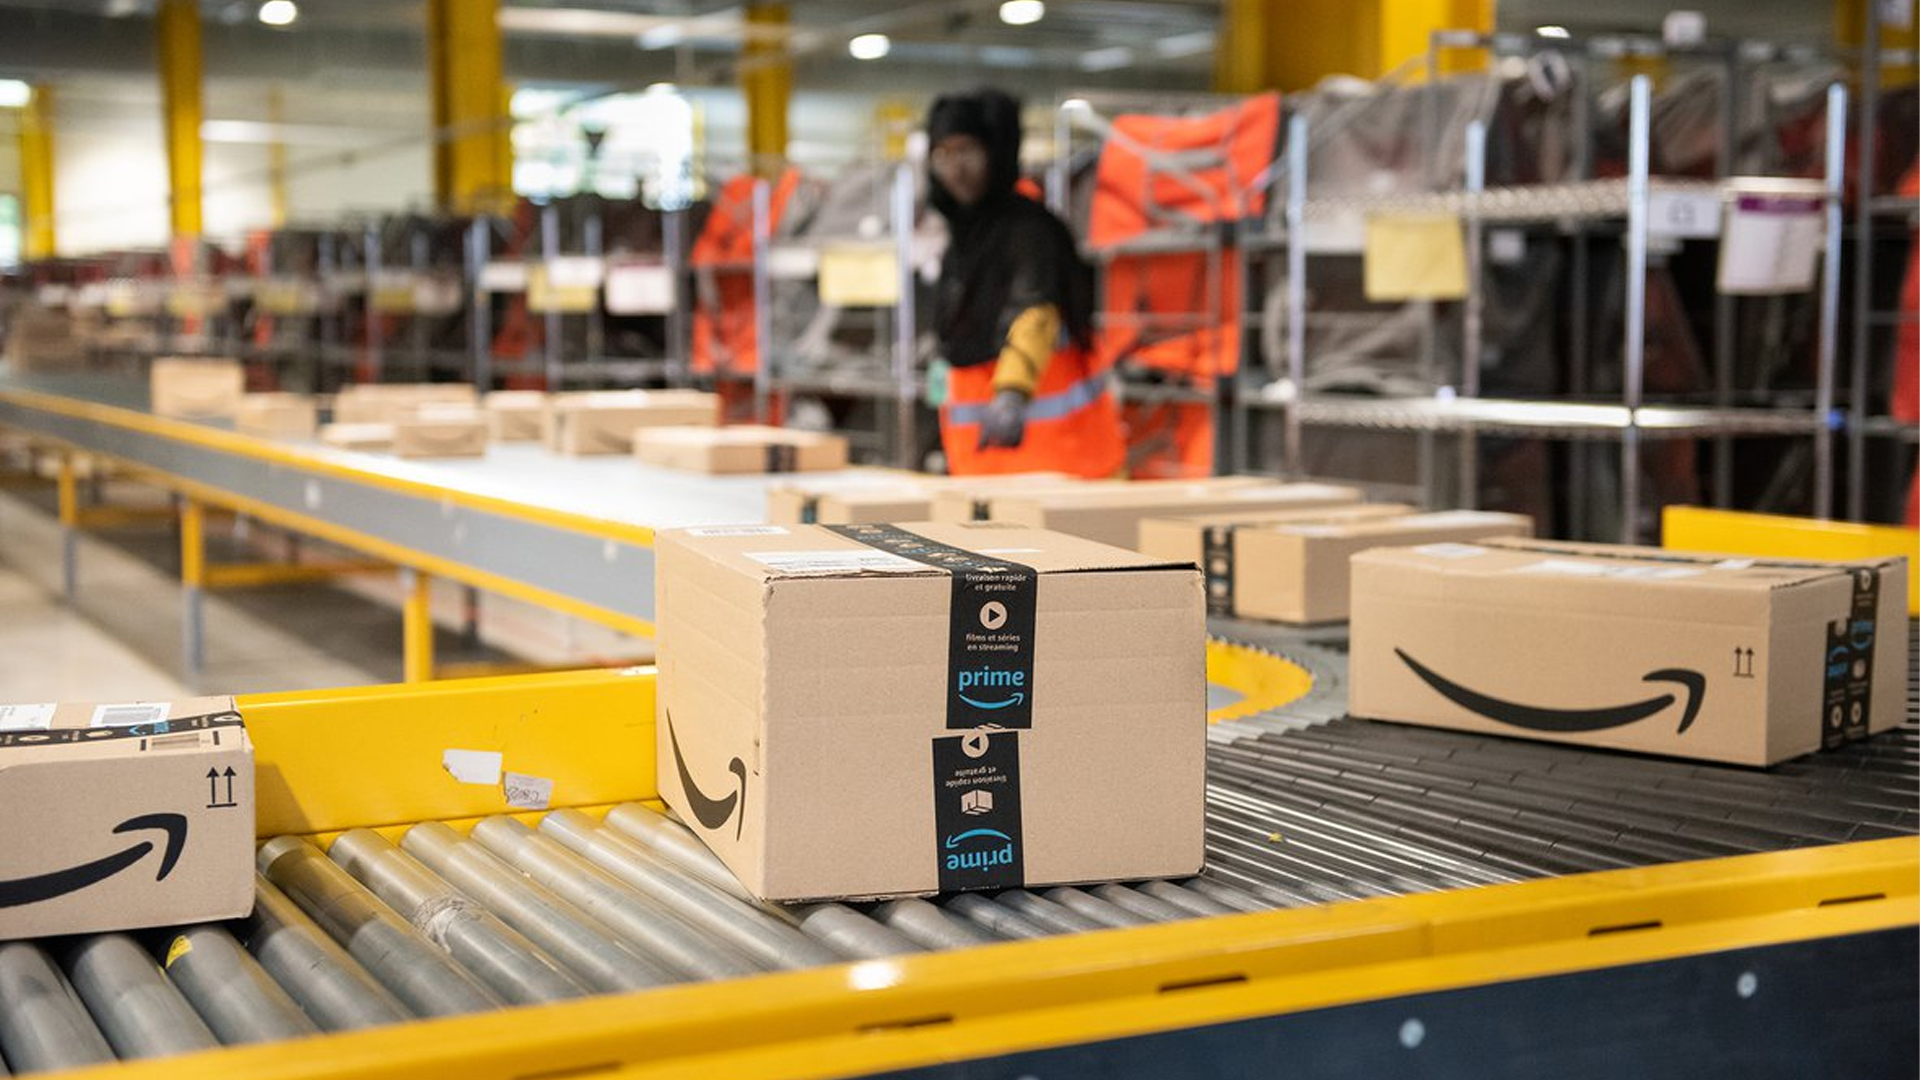 Amazon's Battle Against Counterfeits A Deep Dive into Consumer Trust and Safety